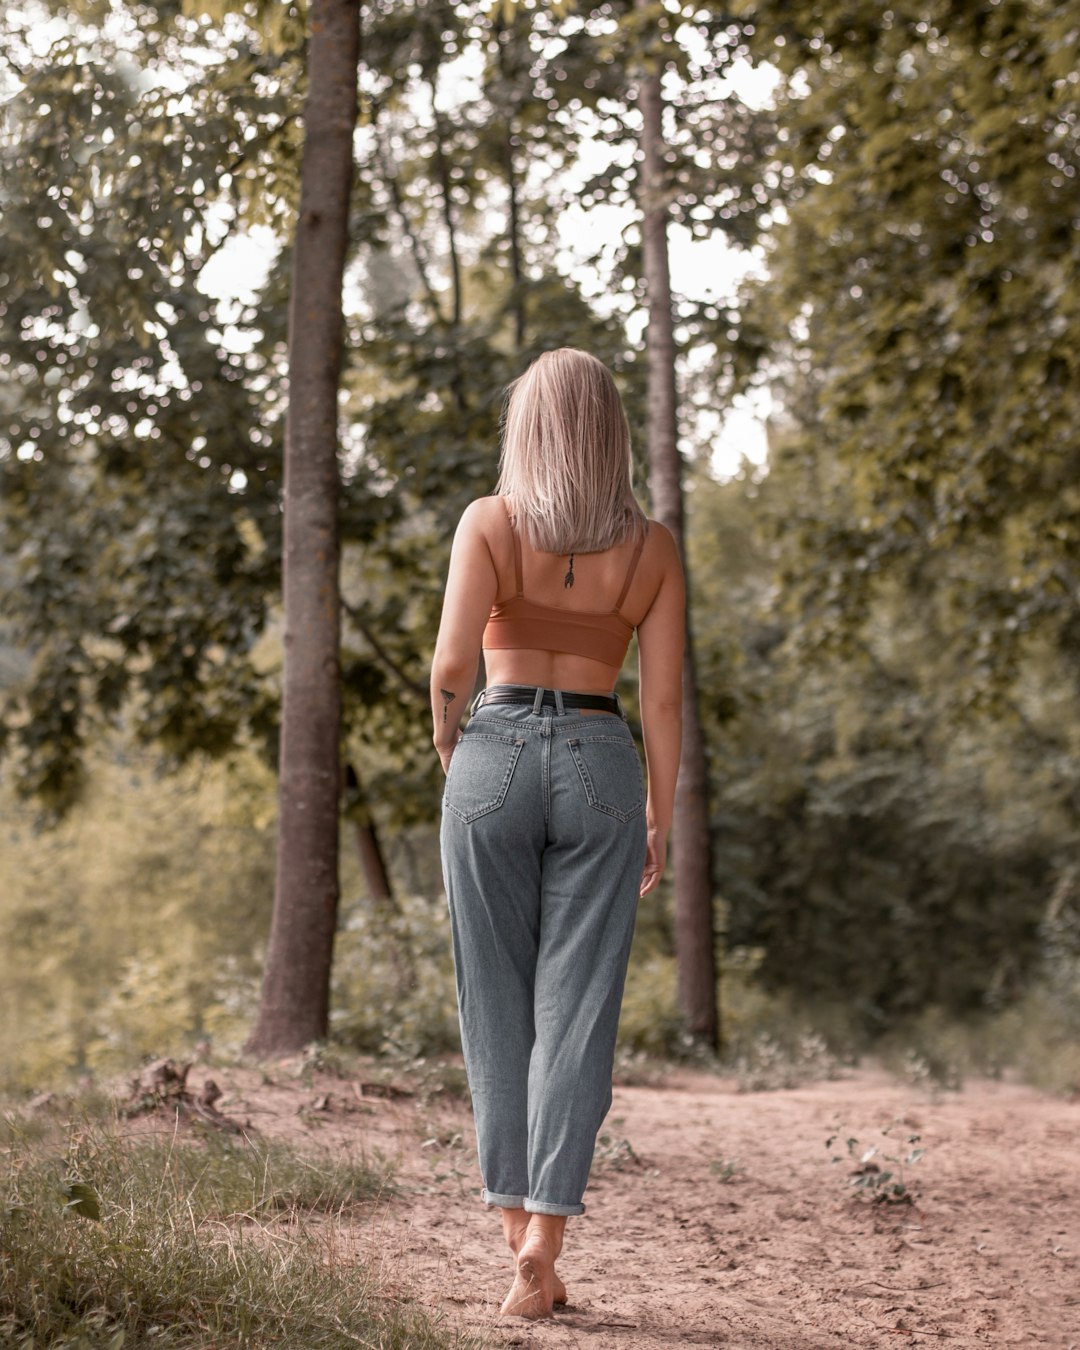 woman in brown tank top and blue denim jeans standing on brown dirt road during daytime